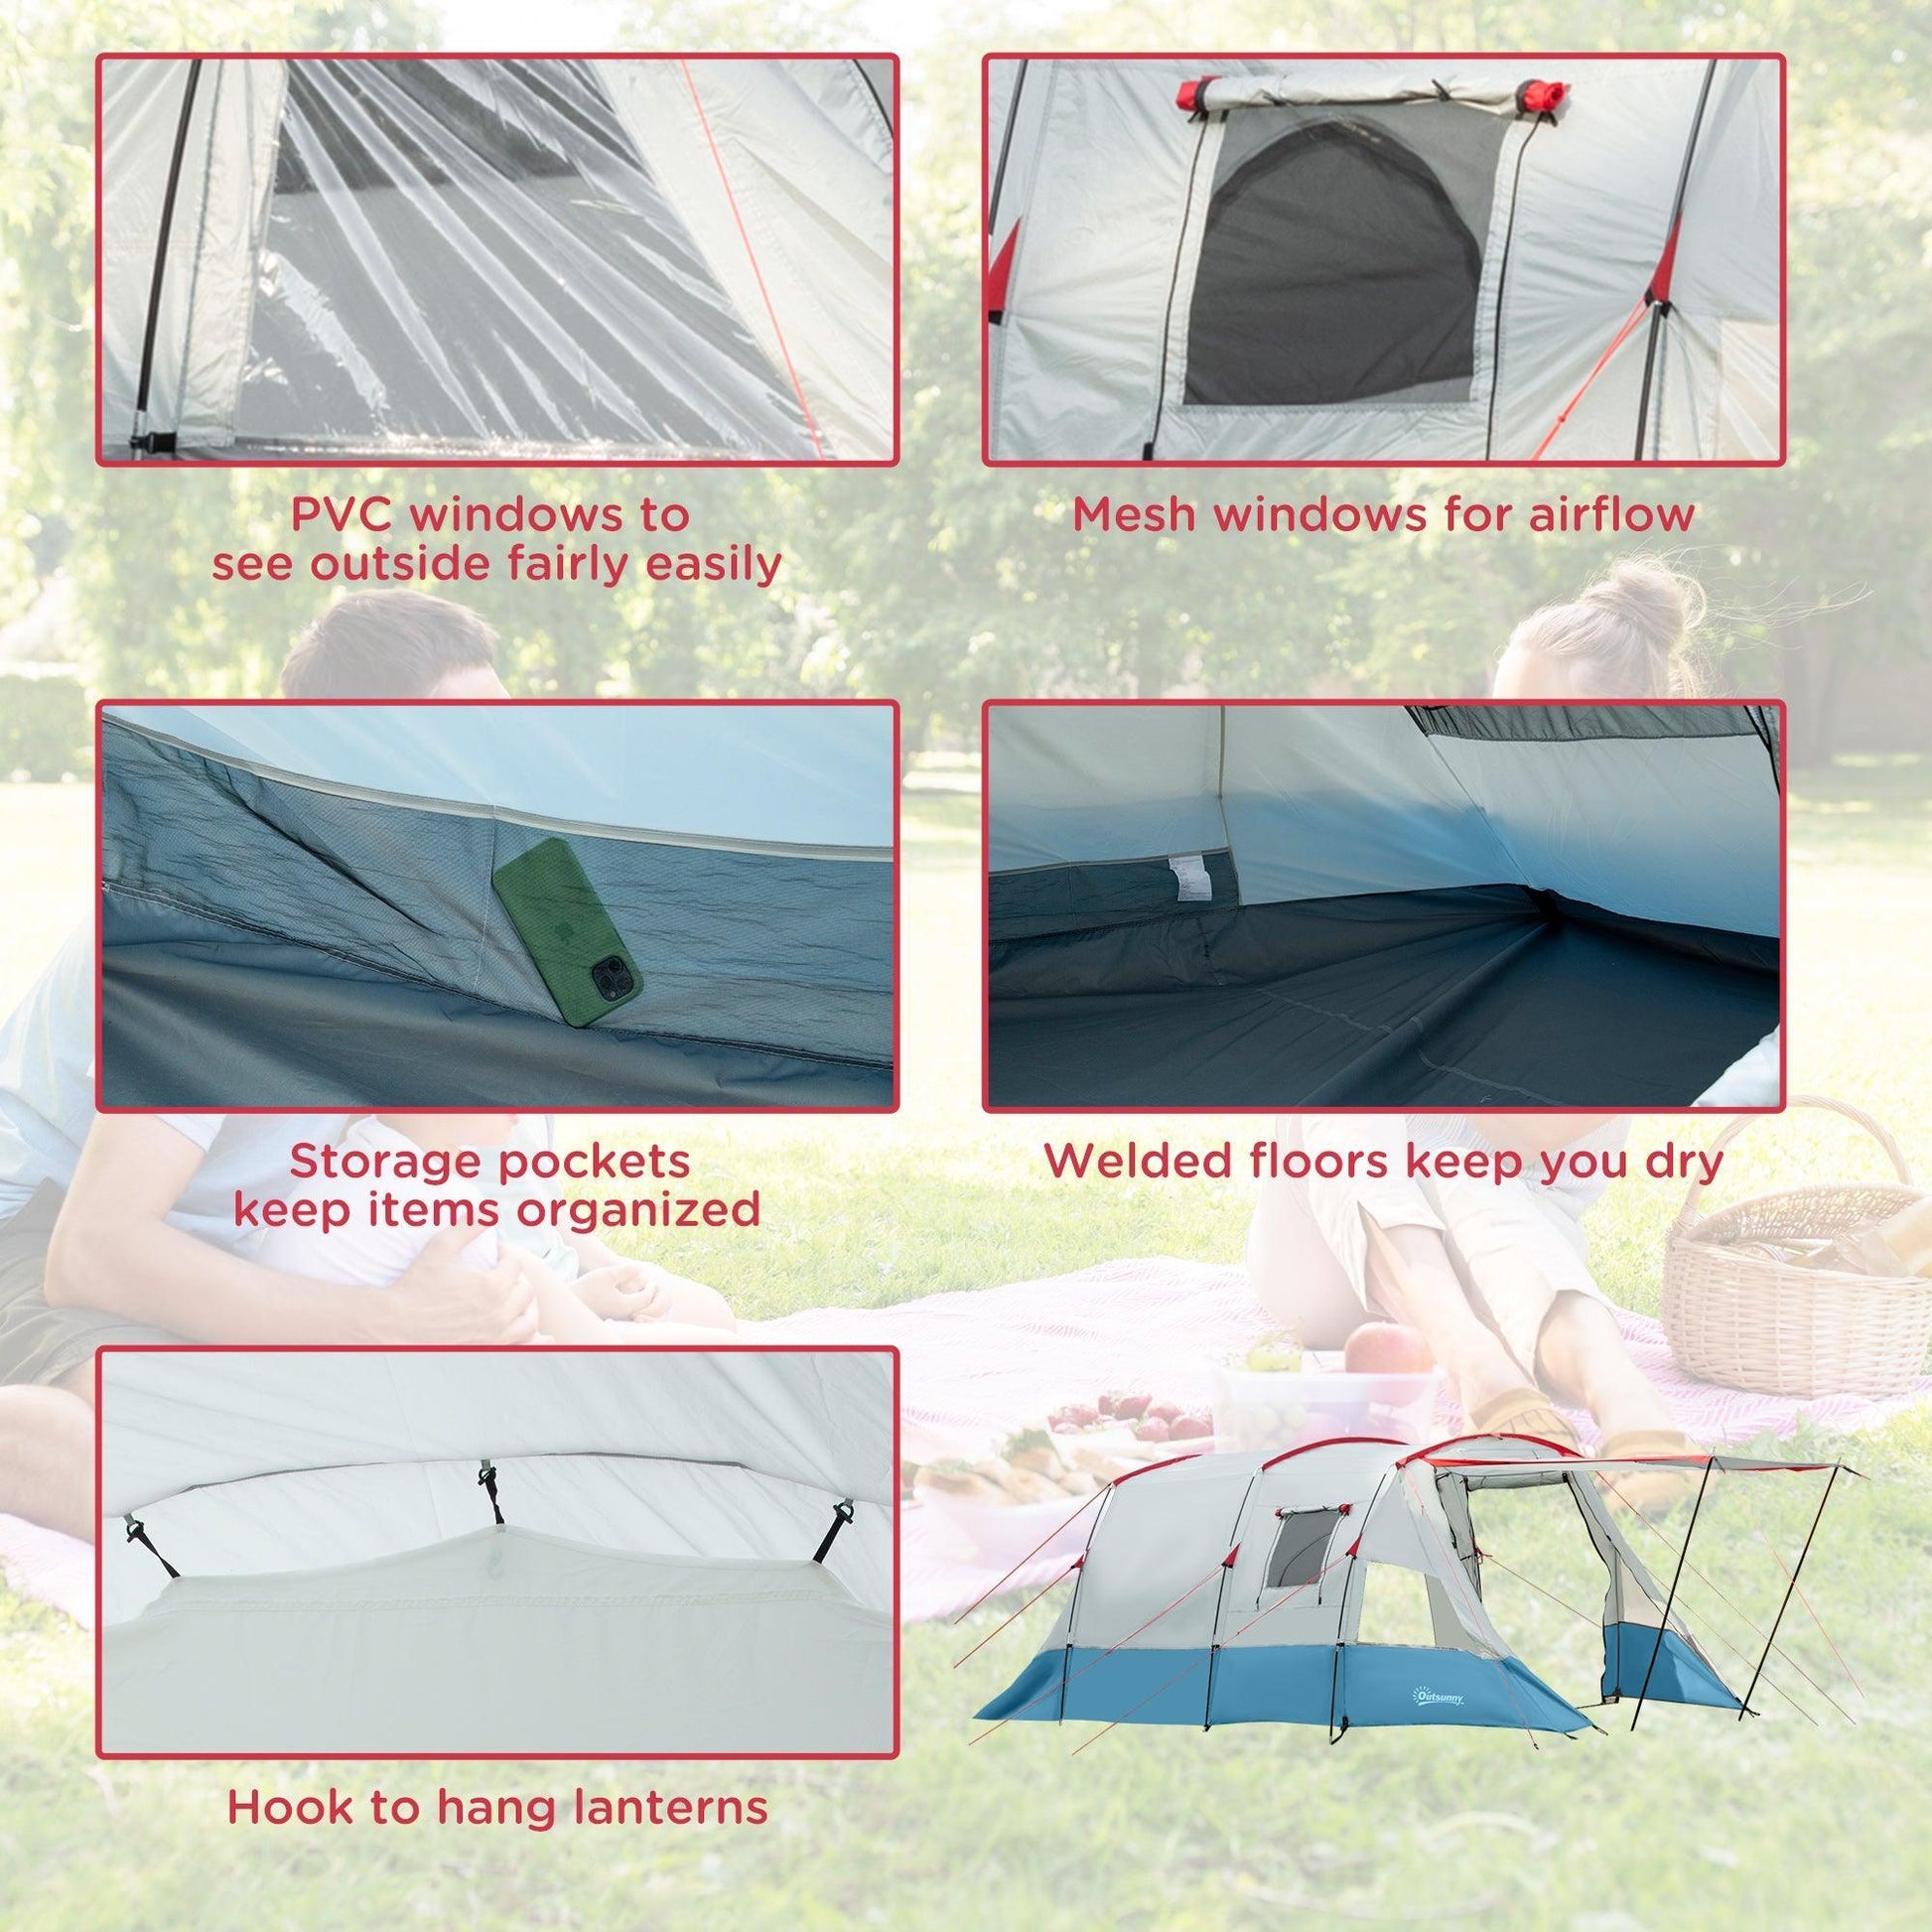 Outsunny 6-8 Person Tunnel Tent - Spacious and Portable - ALL4U RETAILER LTD